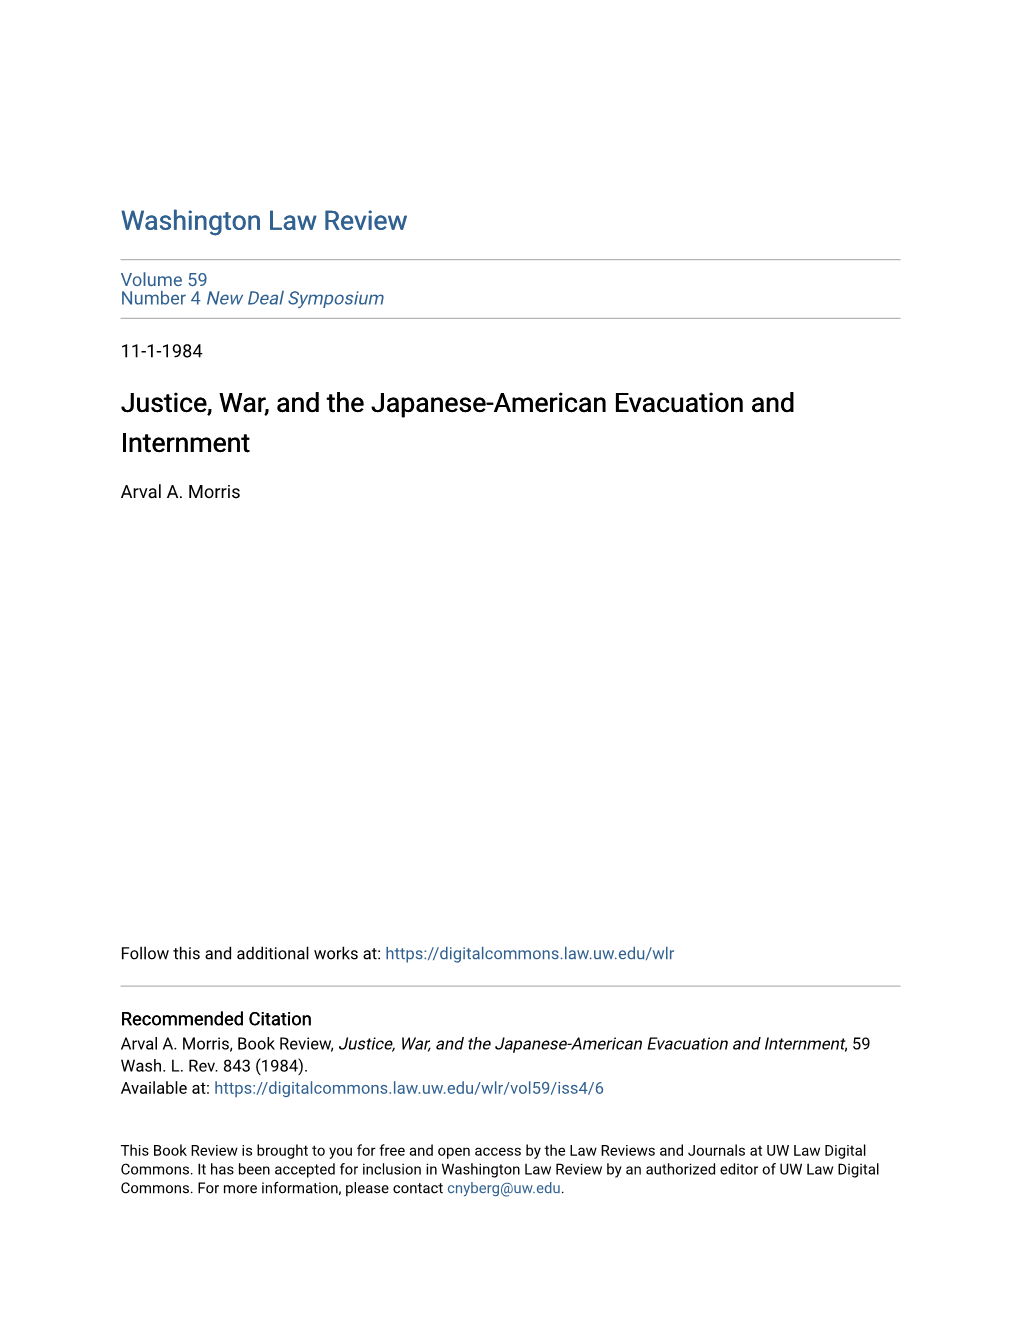 Justice, War, and the Japanese-American Evacuation and Internment